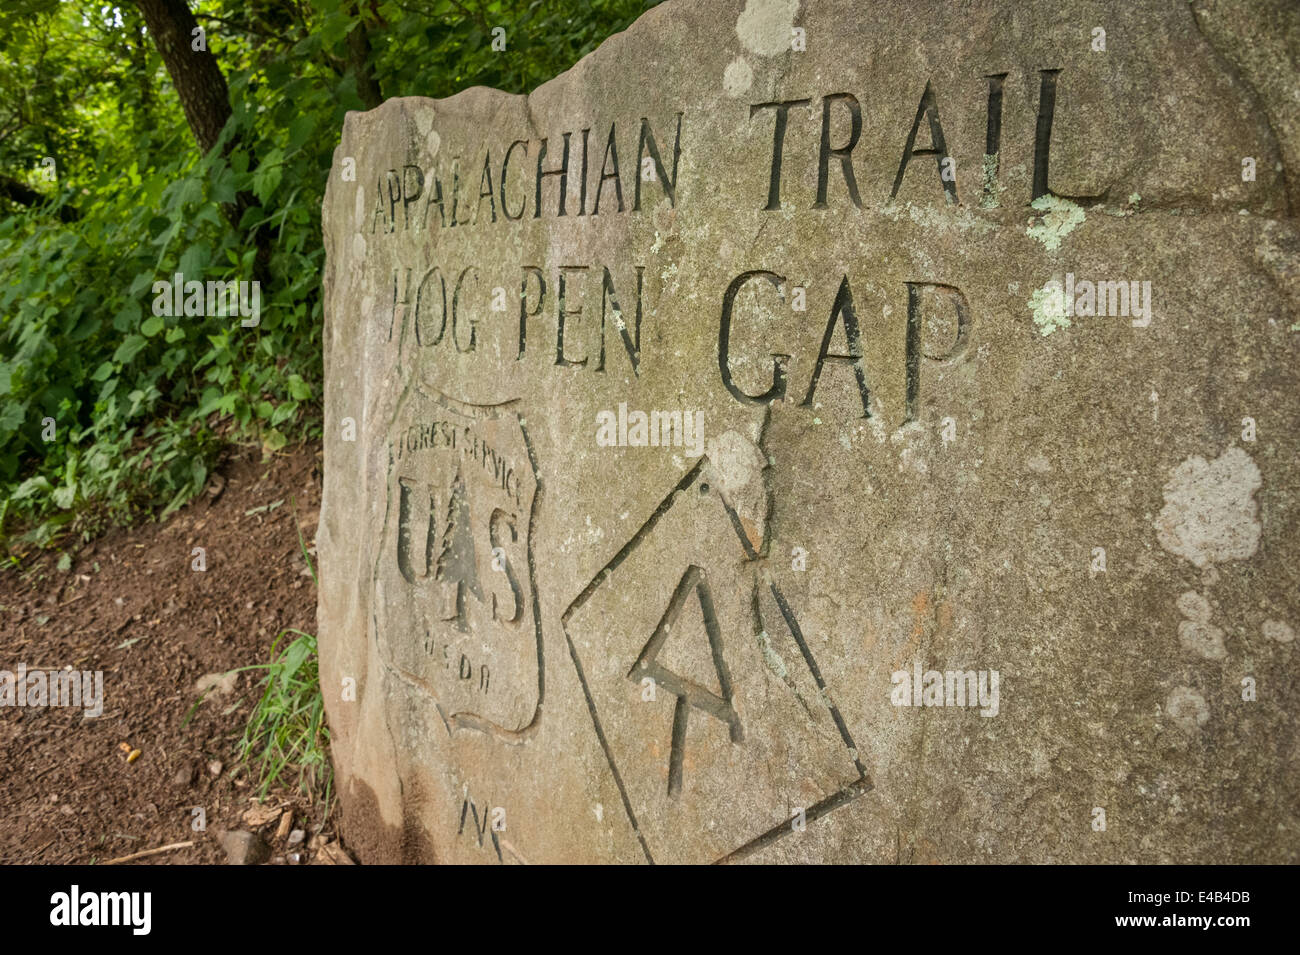 Stone marker where the Appalachian Trail meets the Richard B. Russell Scenic Highway at Hog Pen Gap in North Georgia, USA. Stock Photo